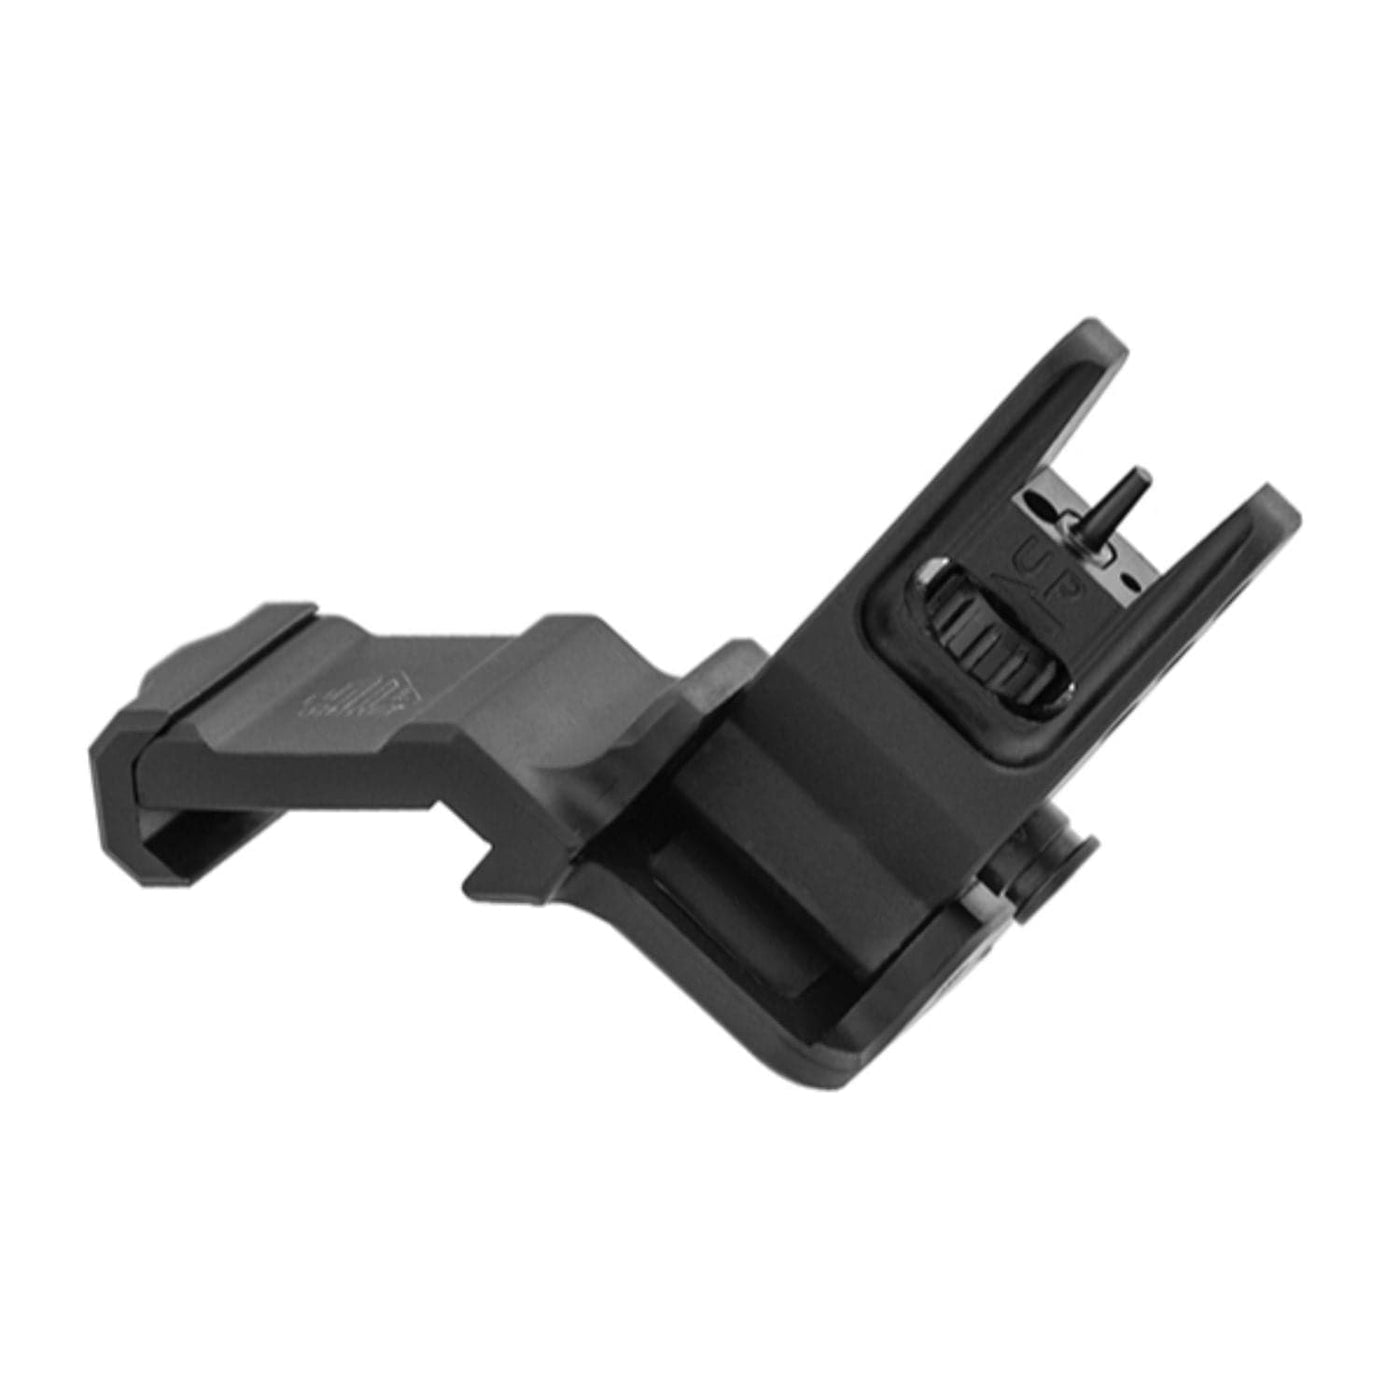 Leapers Leapers UTG ACCU-SYNC 45 Degree Angle Flip Up Front Sight Optics And Sights